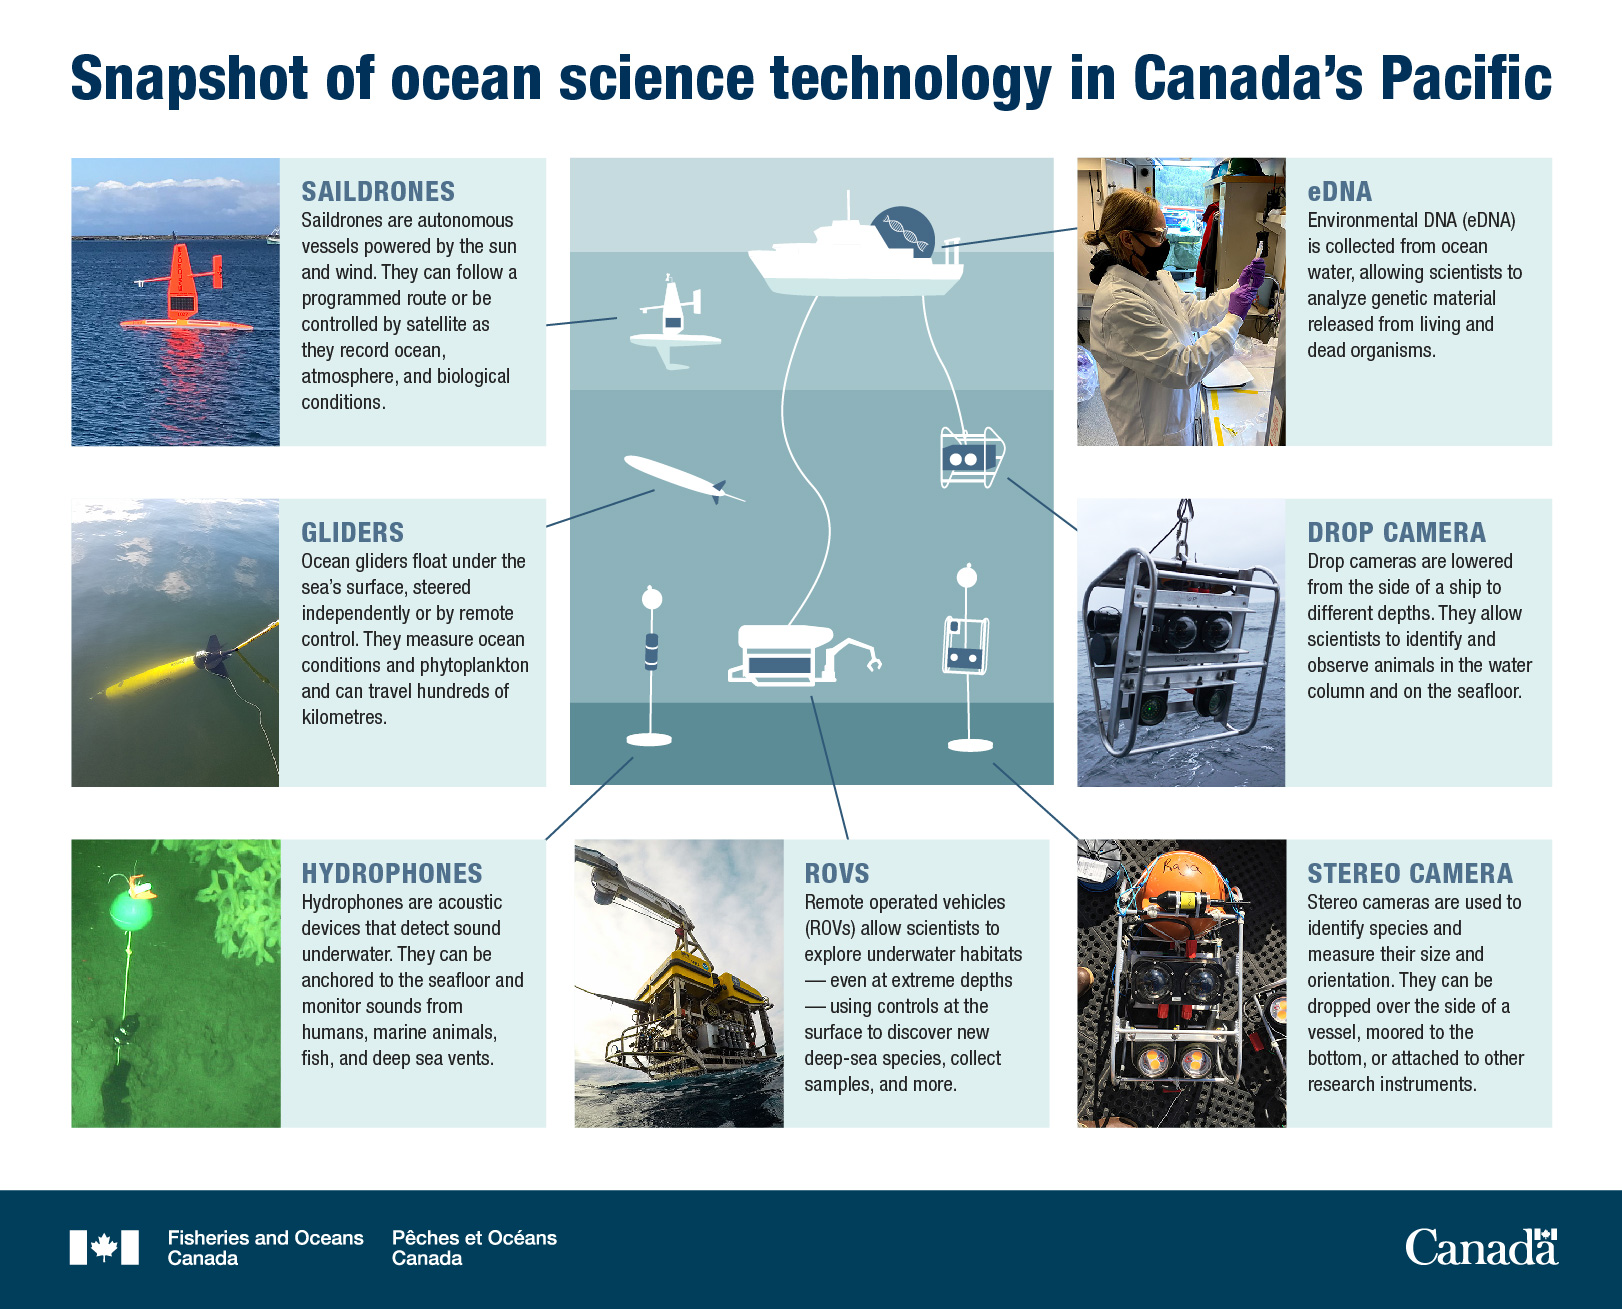 Canada’s Oceans Now, Pacific Ecosystems 2021 - Snapshot of ocean science technology in Canada’s Pacific